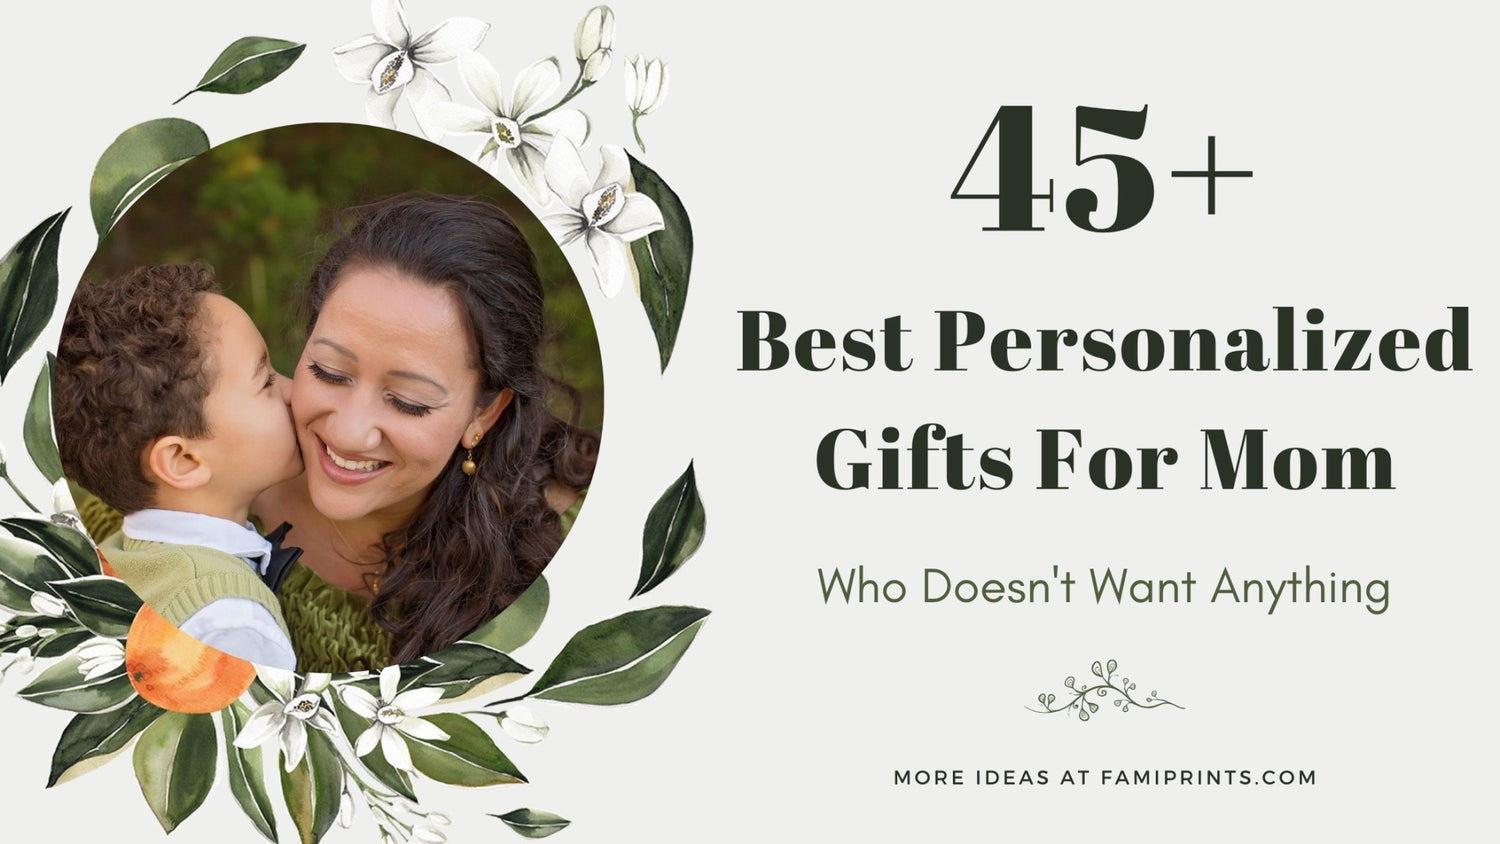 45+ Amazing Personalized Gifts For Mom Who Doesn't Want Anything (2022 Guide) - FamiPrints | Trending Customizable Family Gifts